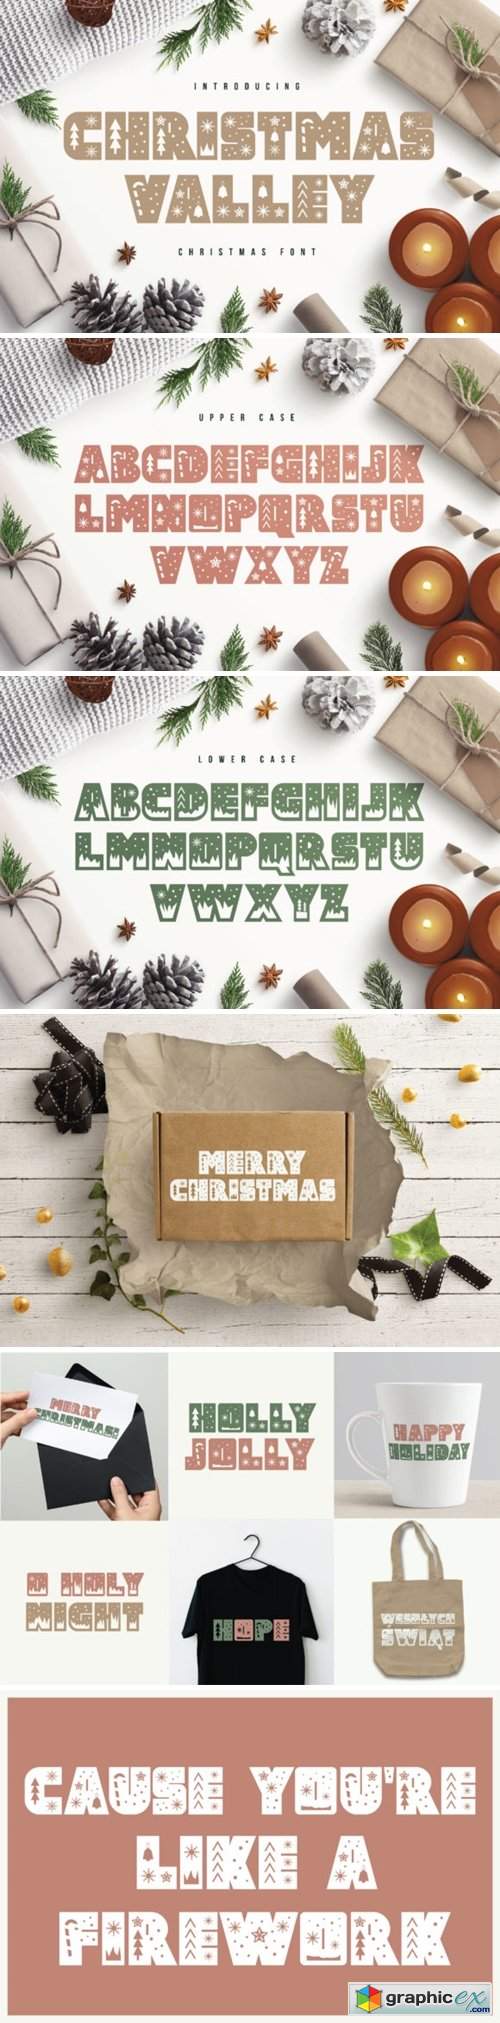  Christmas Valley Font 